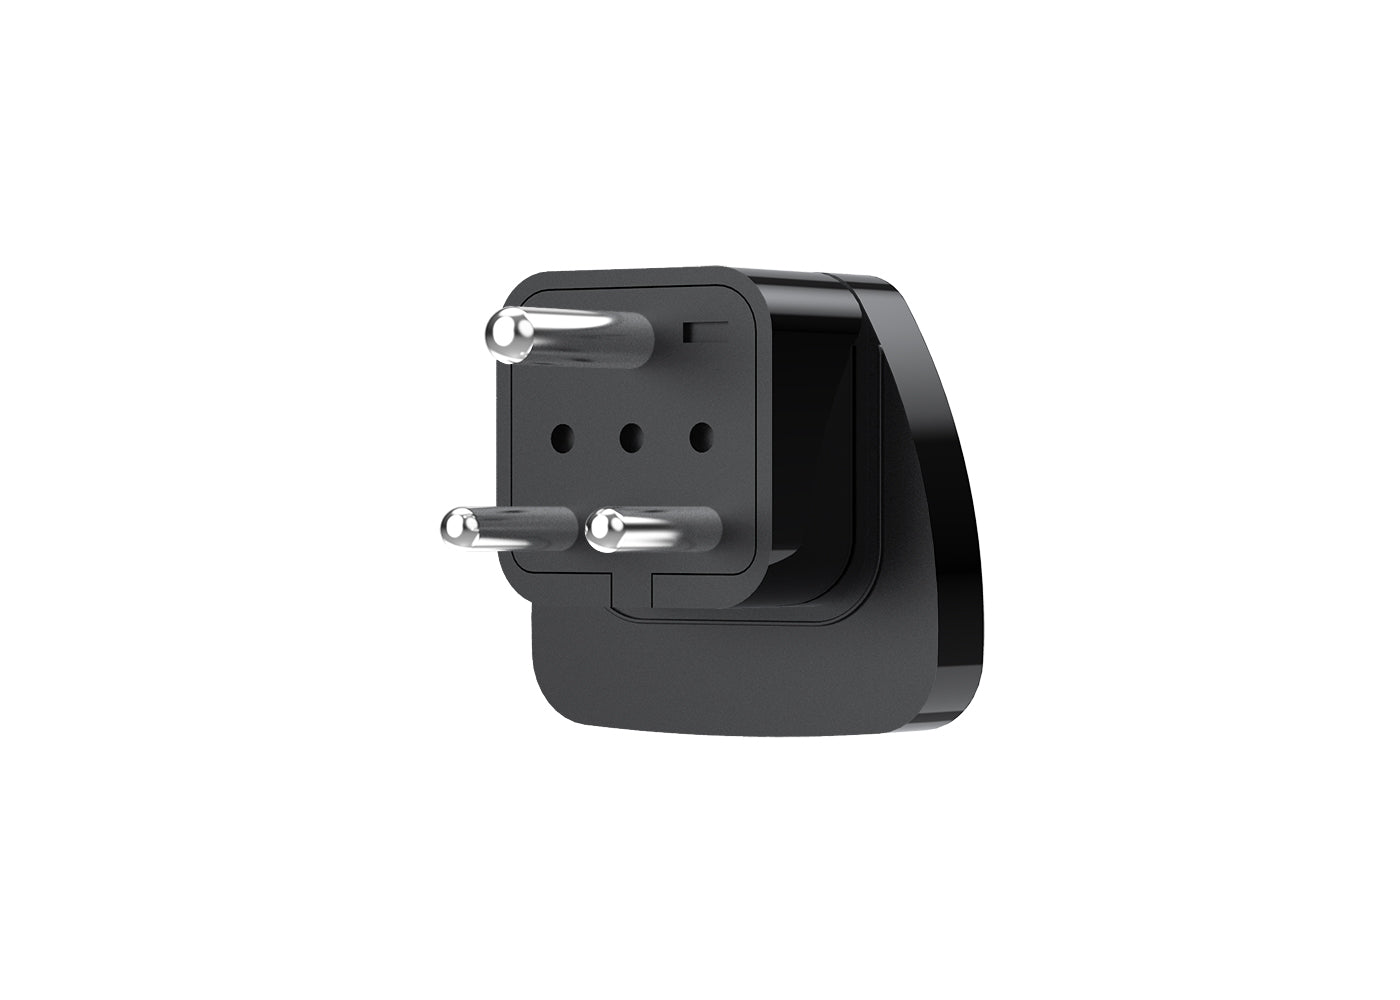 Universal Power Adapter for India/Asia